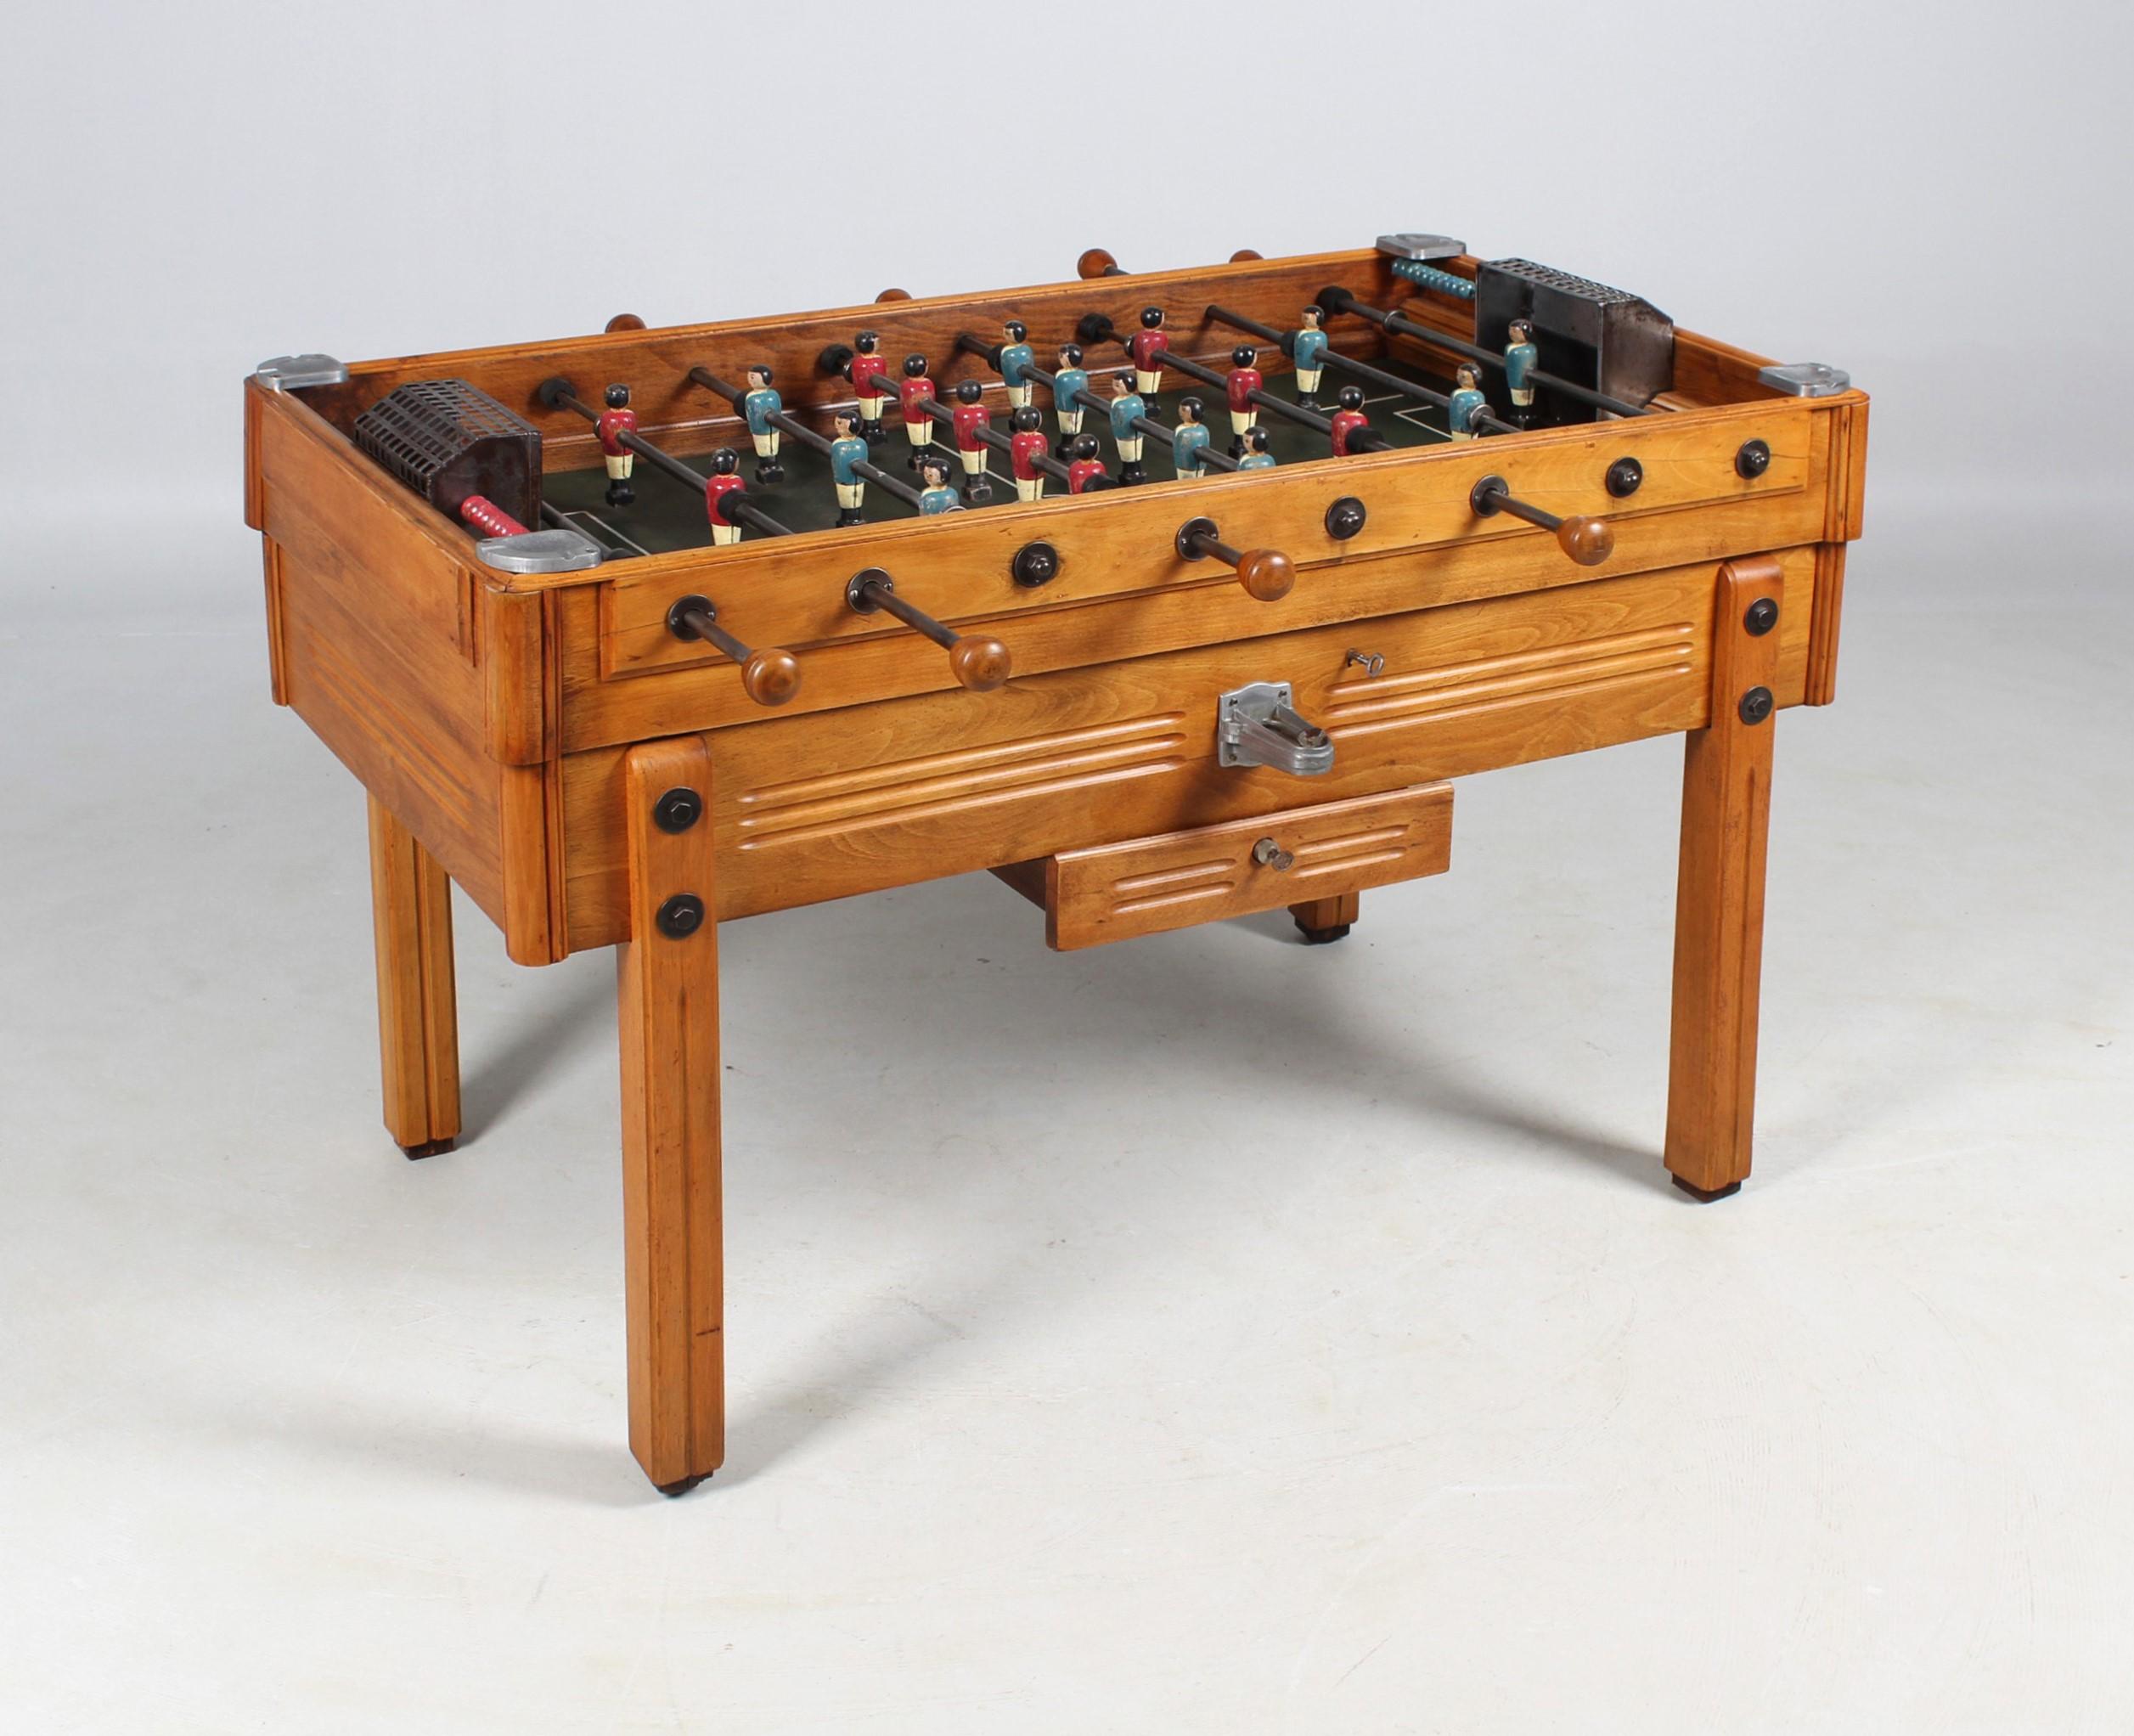 Antique foosball table

France
Beech
1920s - 1930s

Dimensions: H x W x D: 88 x 75 x 138 cm, handle height: 83 cm

Description:
Rare antique foosball table from the 1920s - 1930s.

The table is made of solid beech wood, the playing field is made of